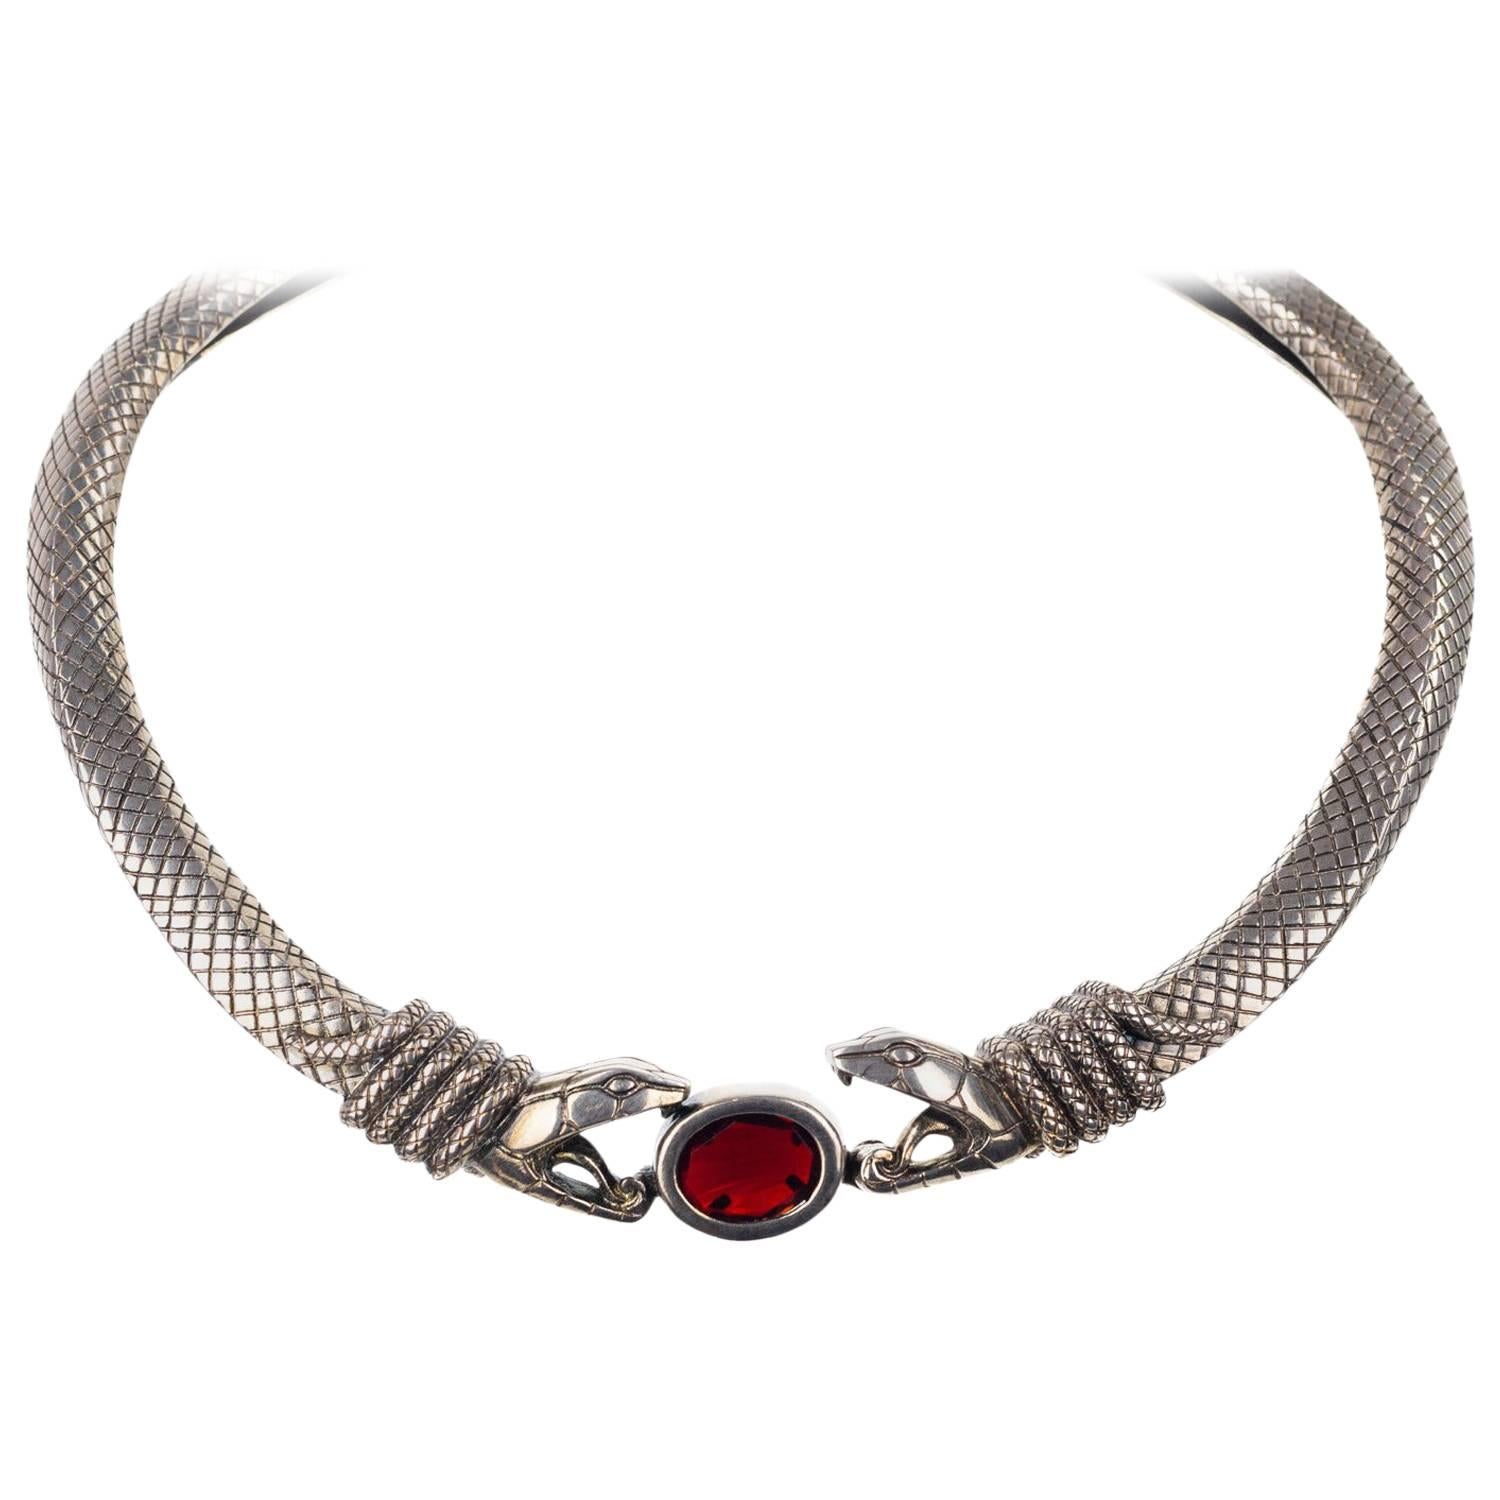 Roberto Cavalli Silver Plated Serpent Red Stone Choker Necklace For Sale